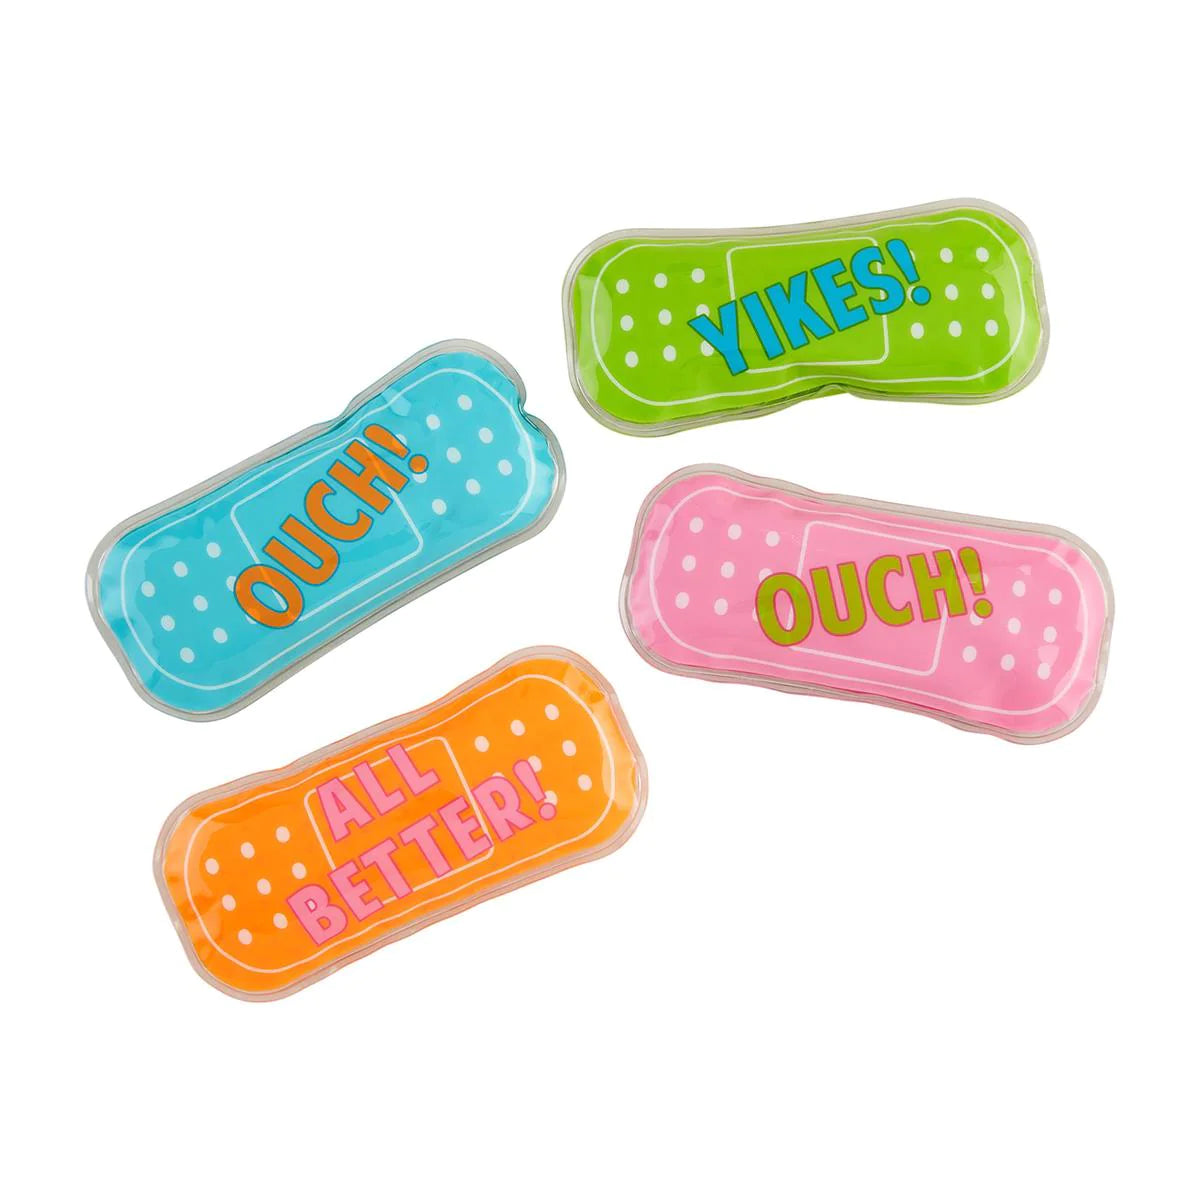 BRIGHT BANDAGE OUCH POUCH